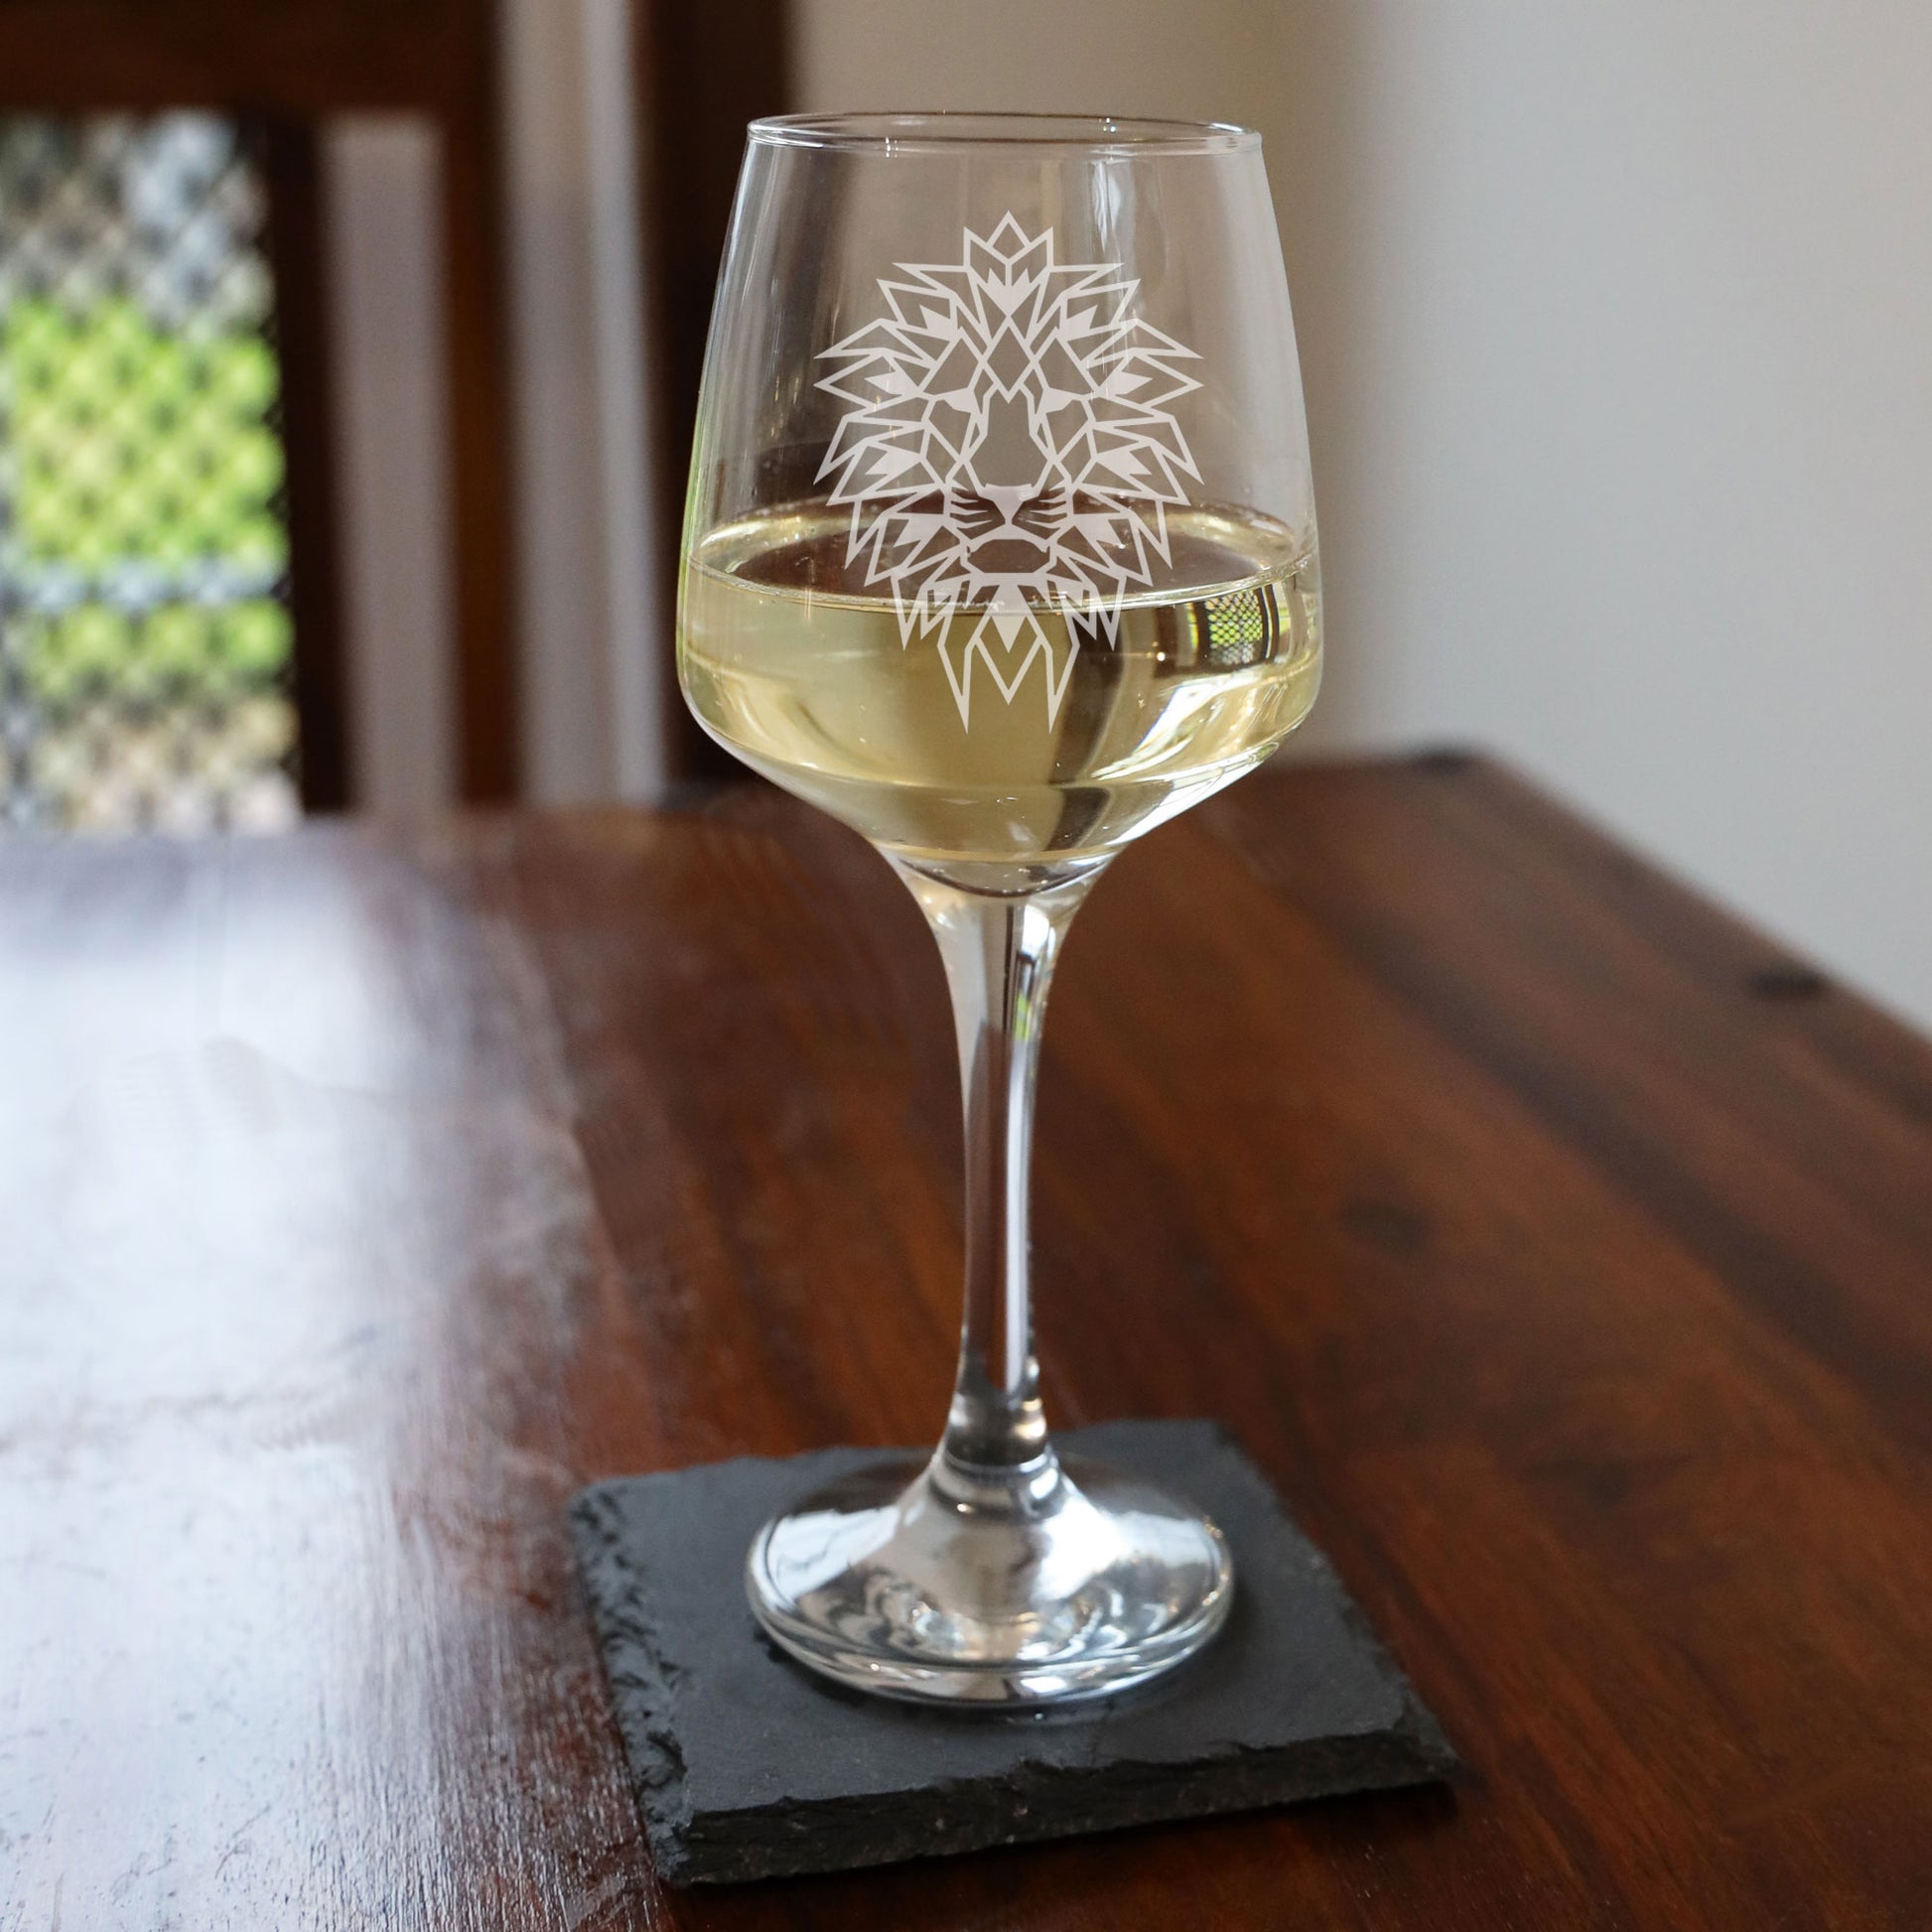 Lion Engraved Wine Glass  - Always Looking Good -   